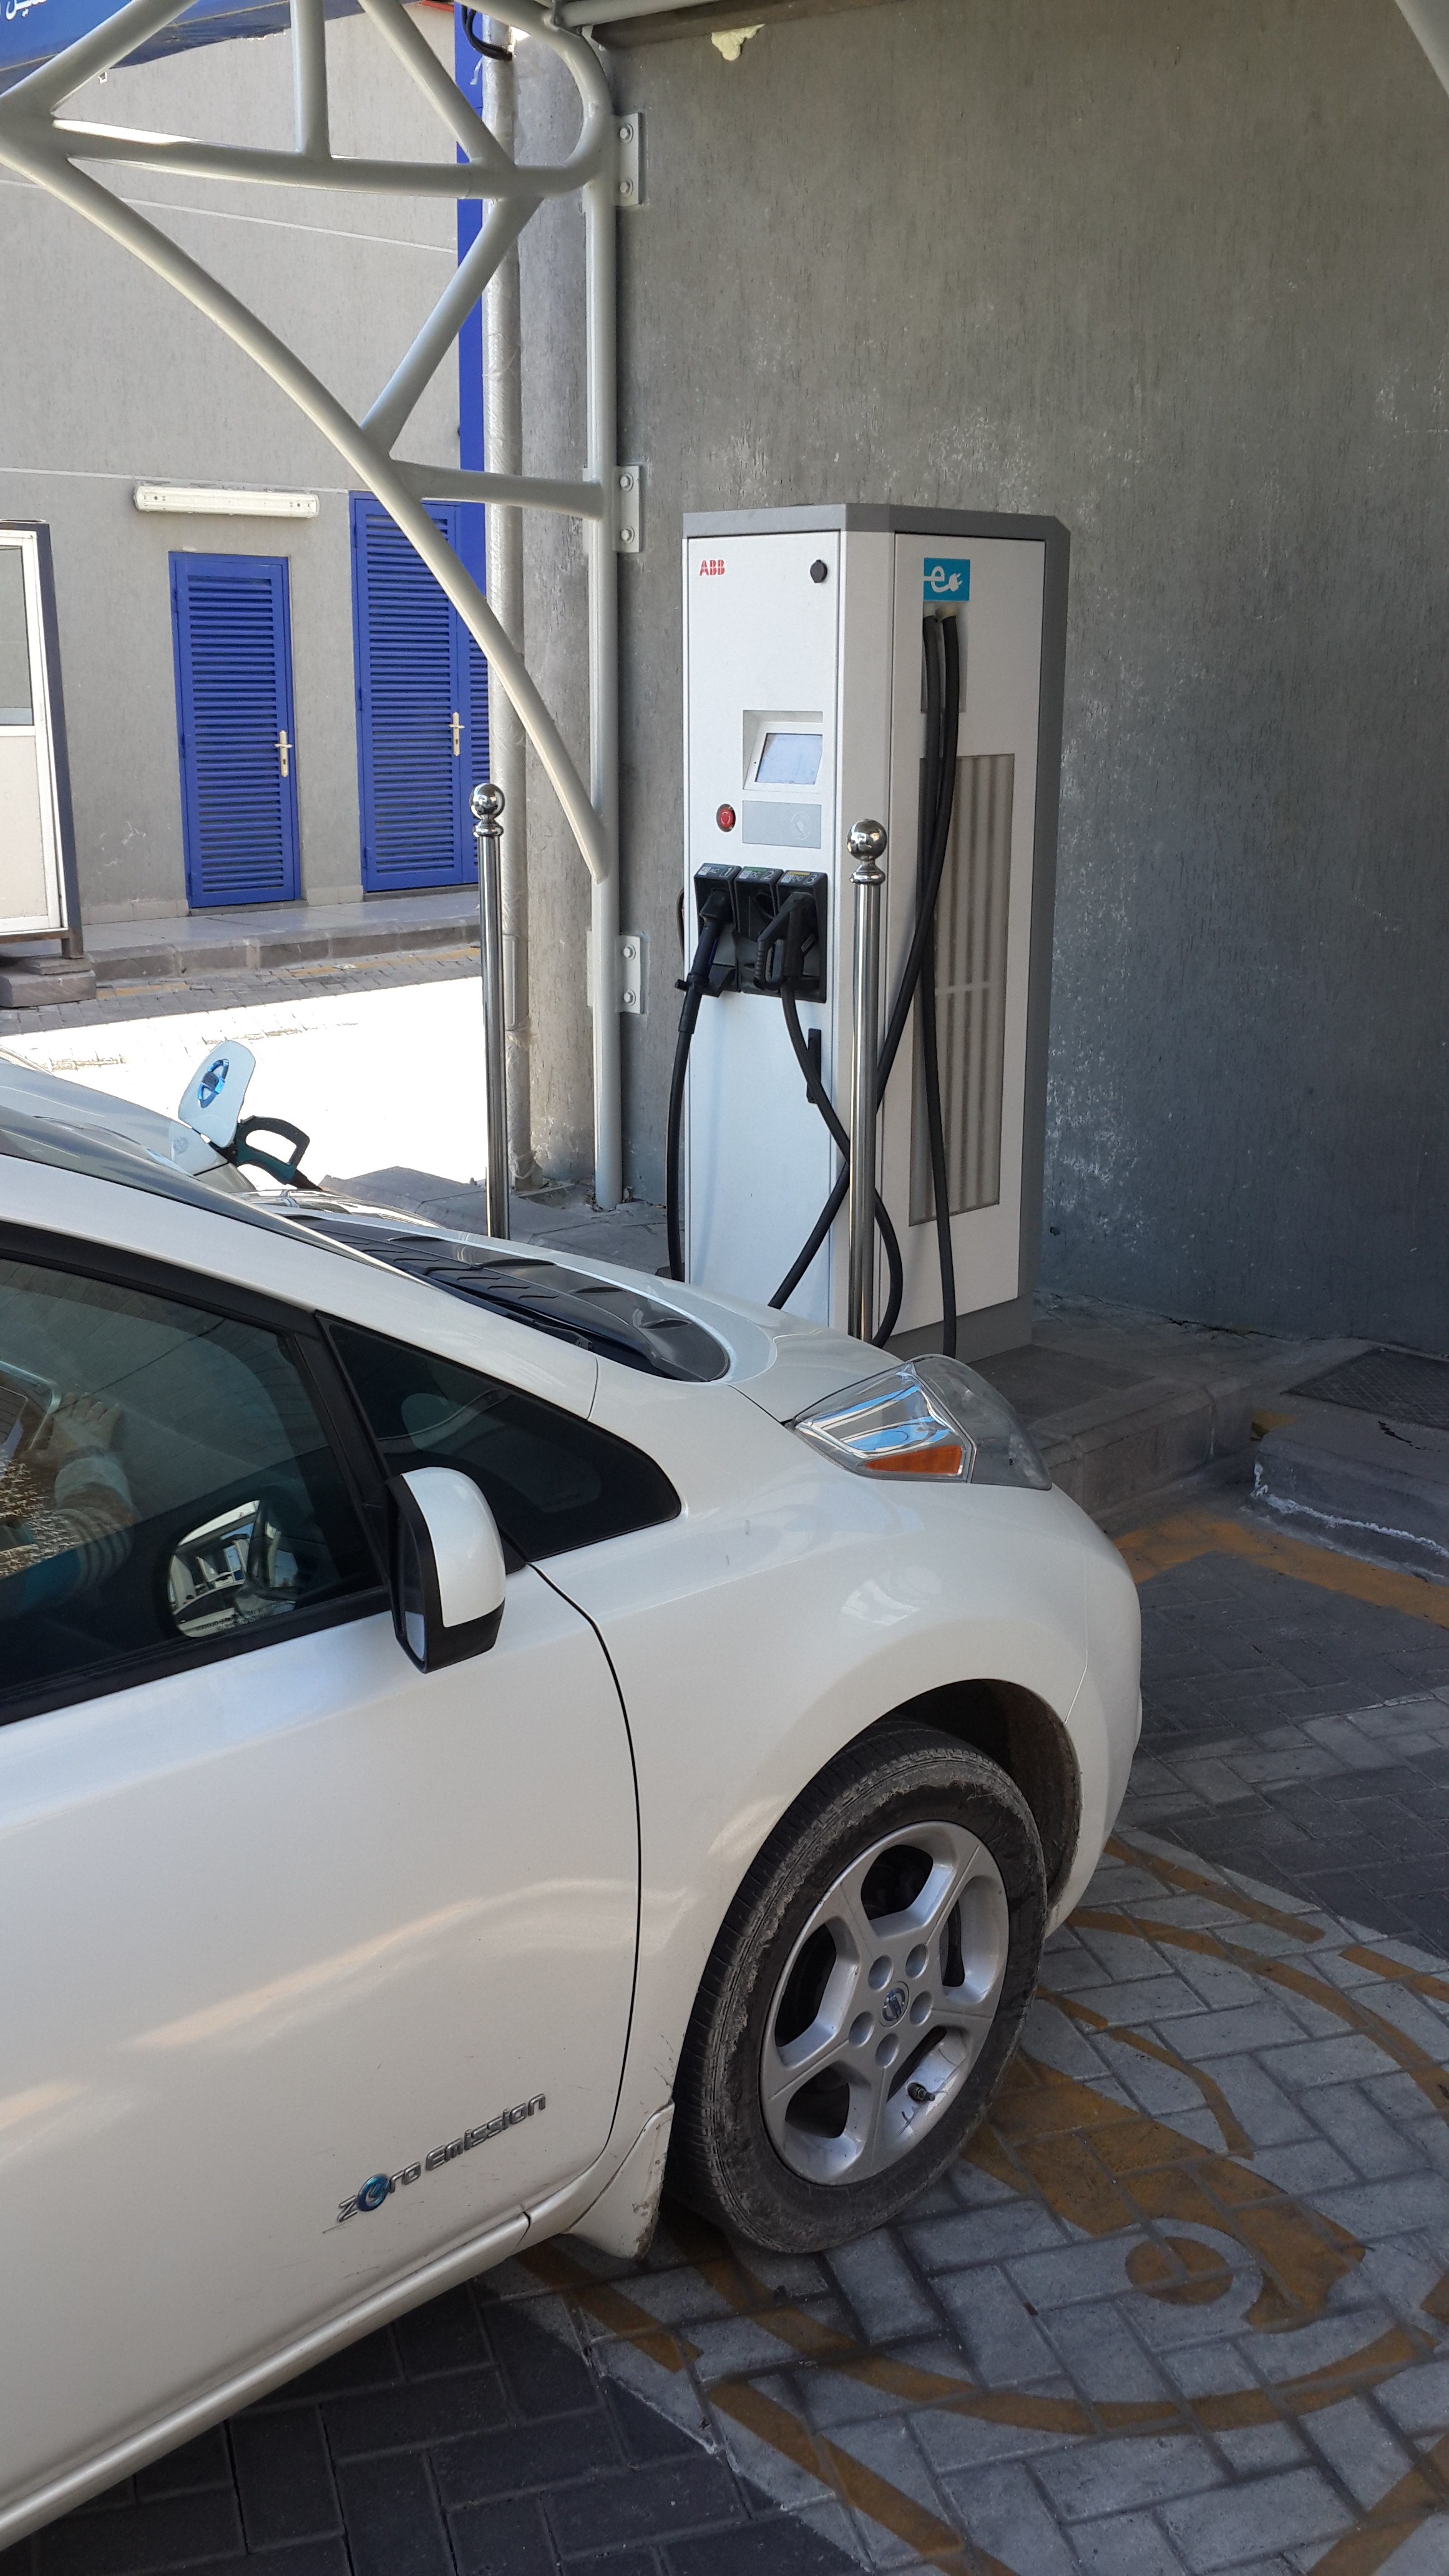 Manaseer Oil & Gas installed 3rd fast electric vehicle cars charger for the public use